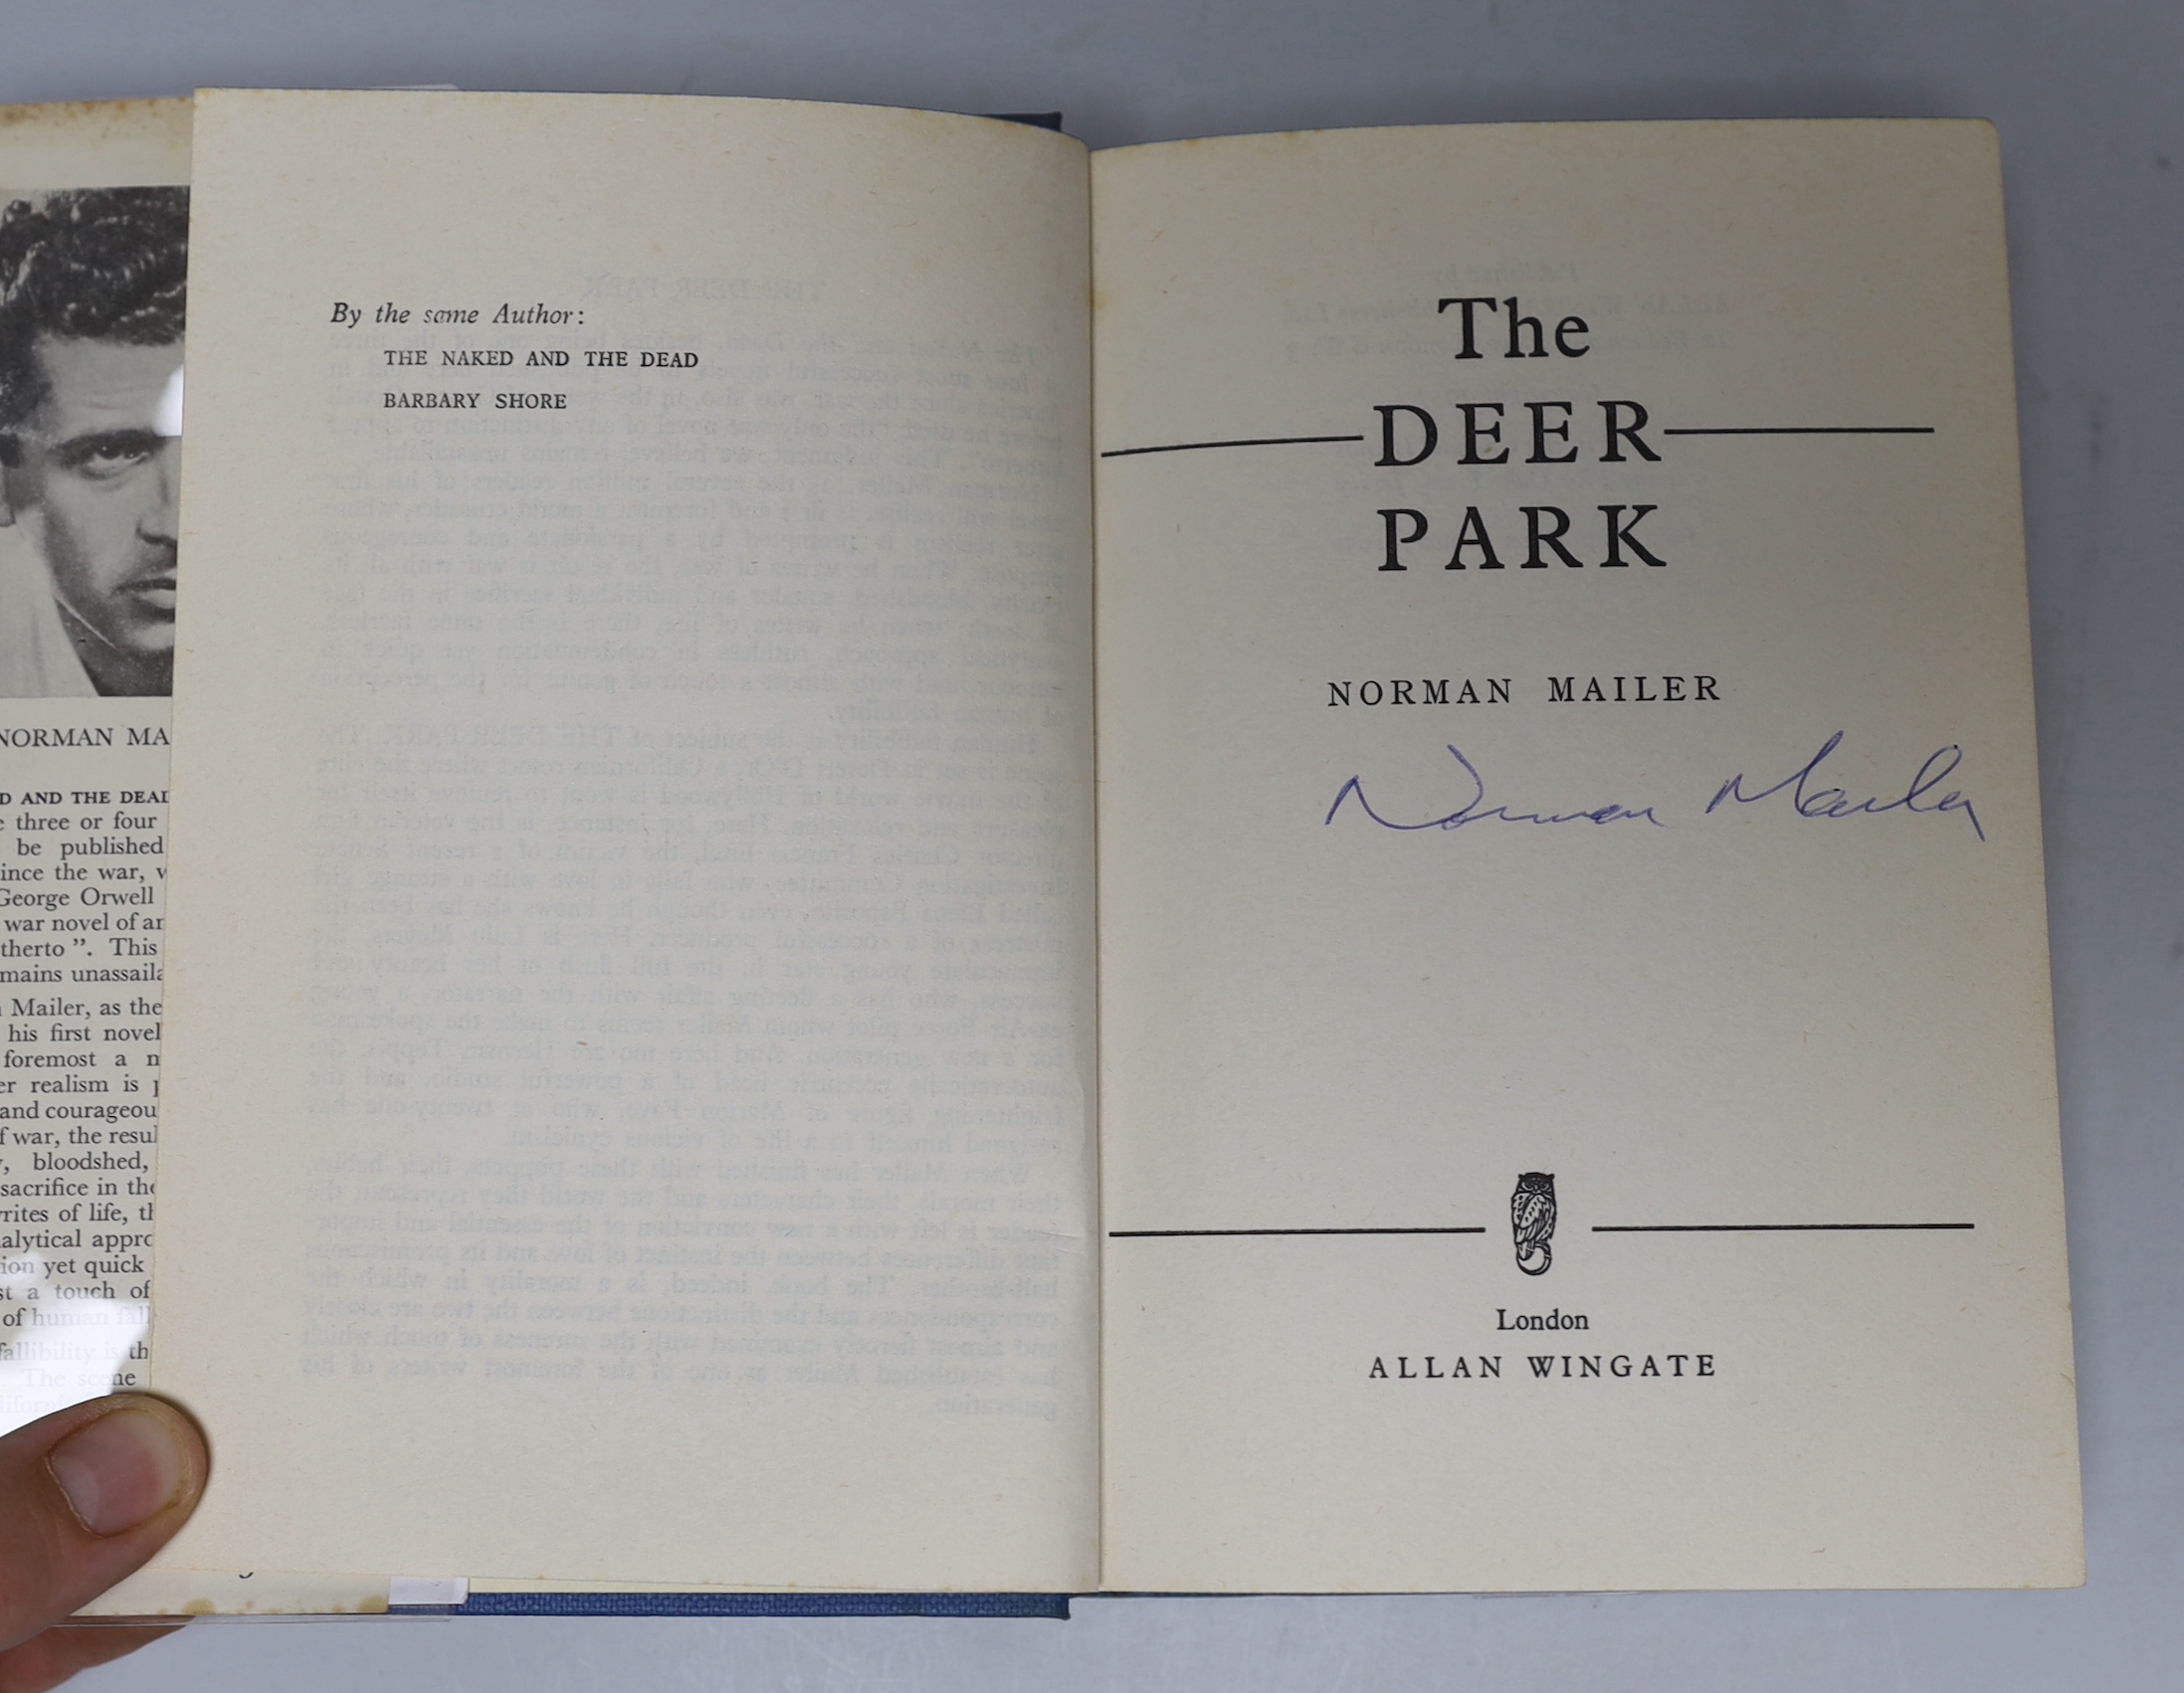 Mailer, Norman - The Deer Park, 1st UK edition, 1st impression, signed by the author to title, publisher’s French blue cloth in unclipped d/j, Allan Wingate, London, 1957